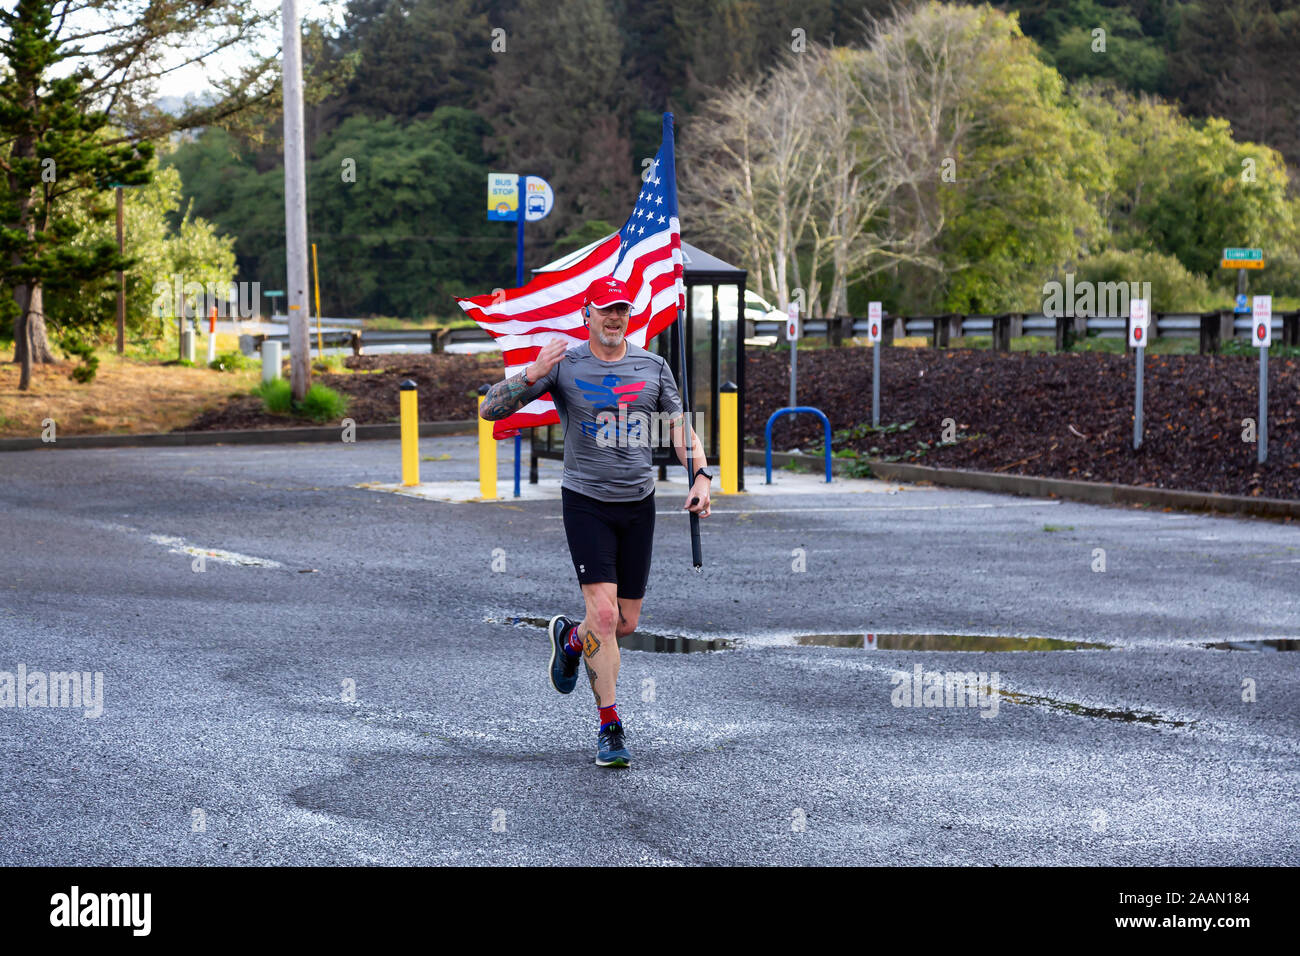 Neskowin, Oregon, United States - September 8, 2019: Proud member of Team RWB is running outside with an American Flag during a summer morning. Stock Photo